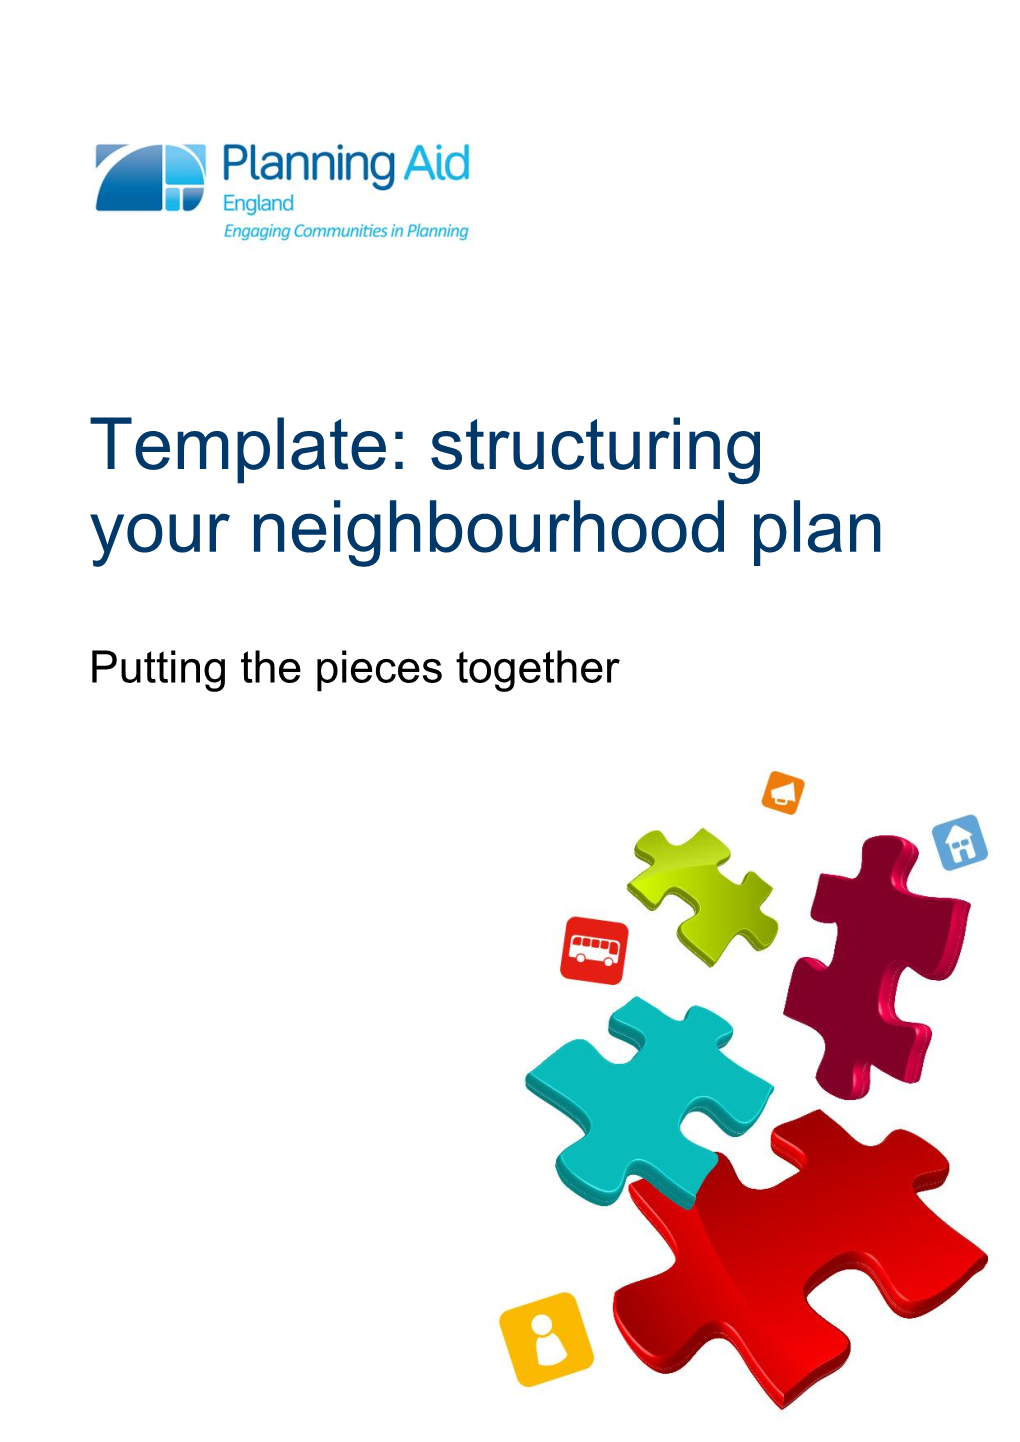 Template: Structuring Your Neighbourhood Plan Page 2 of 5